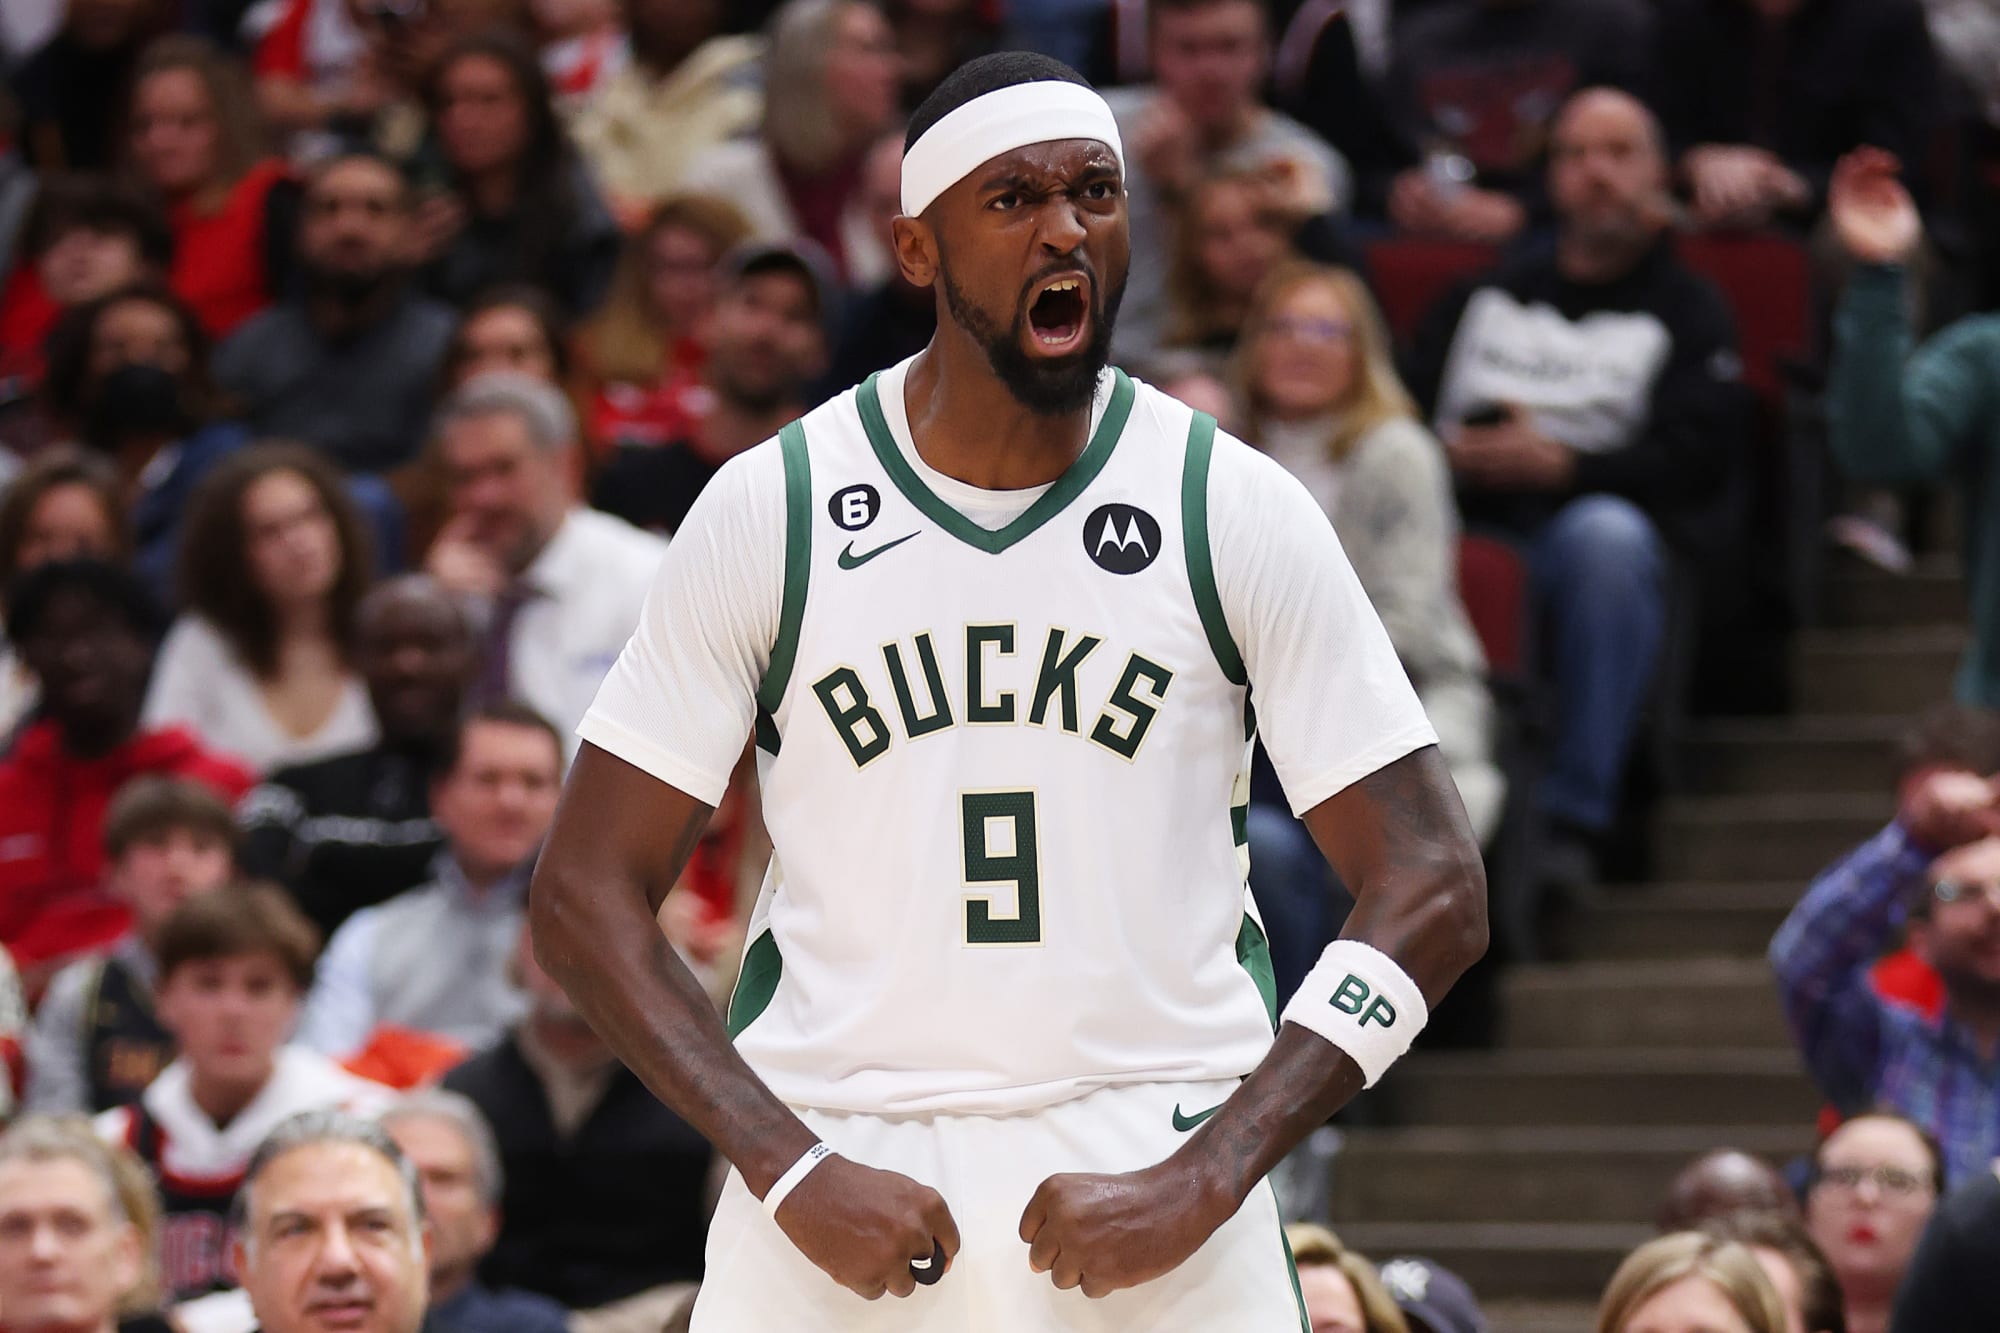 Bucks’ big man Bobby Portis is set to miss time with an MCL sprain